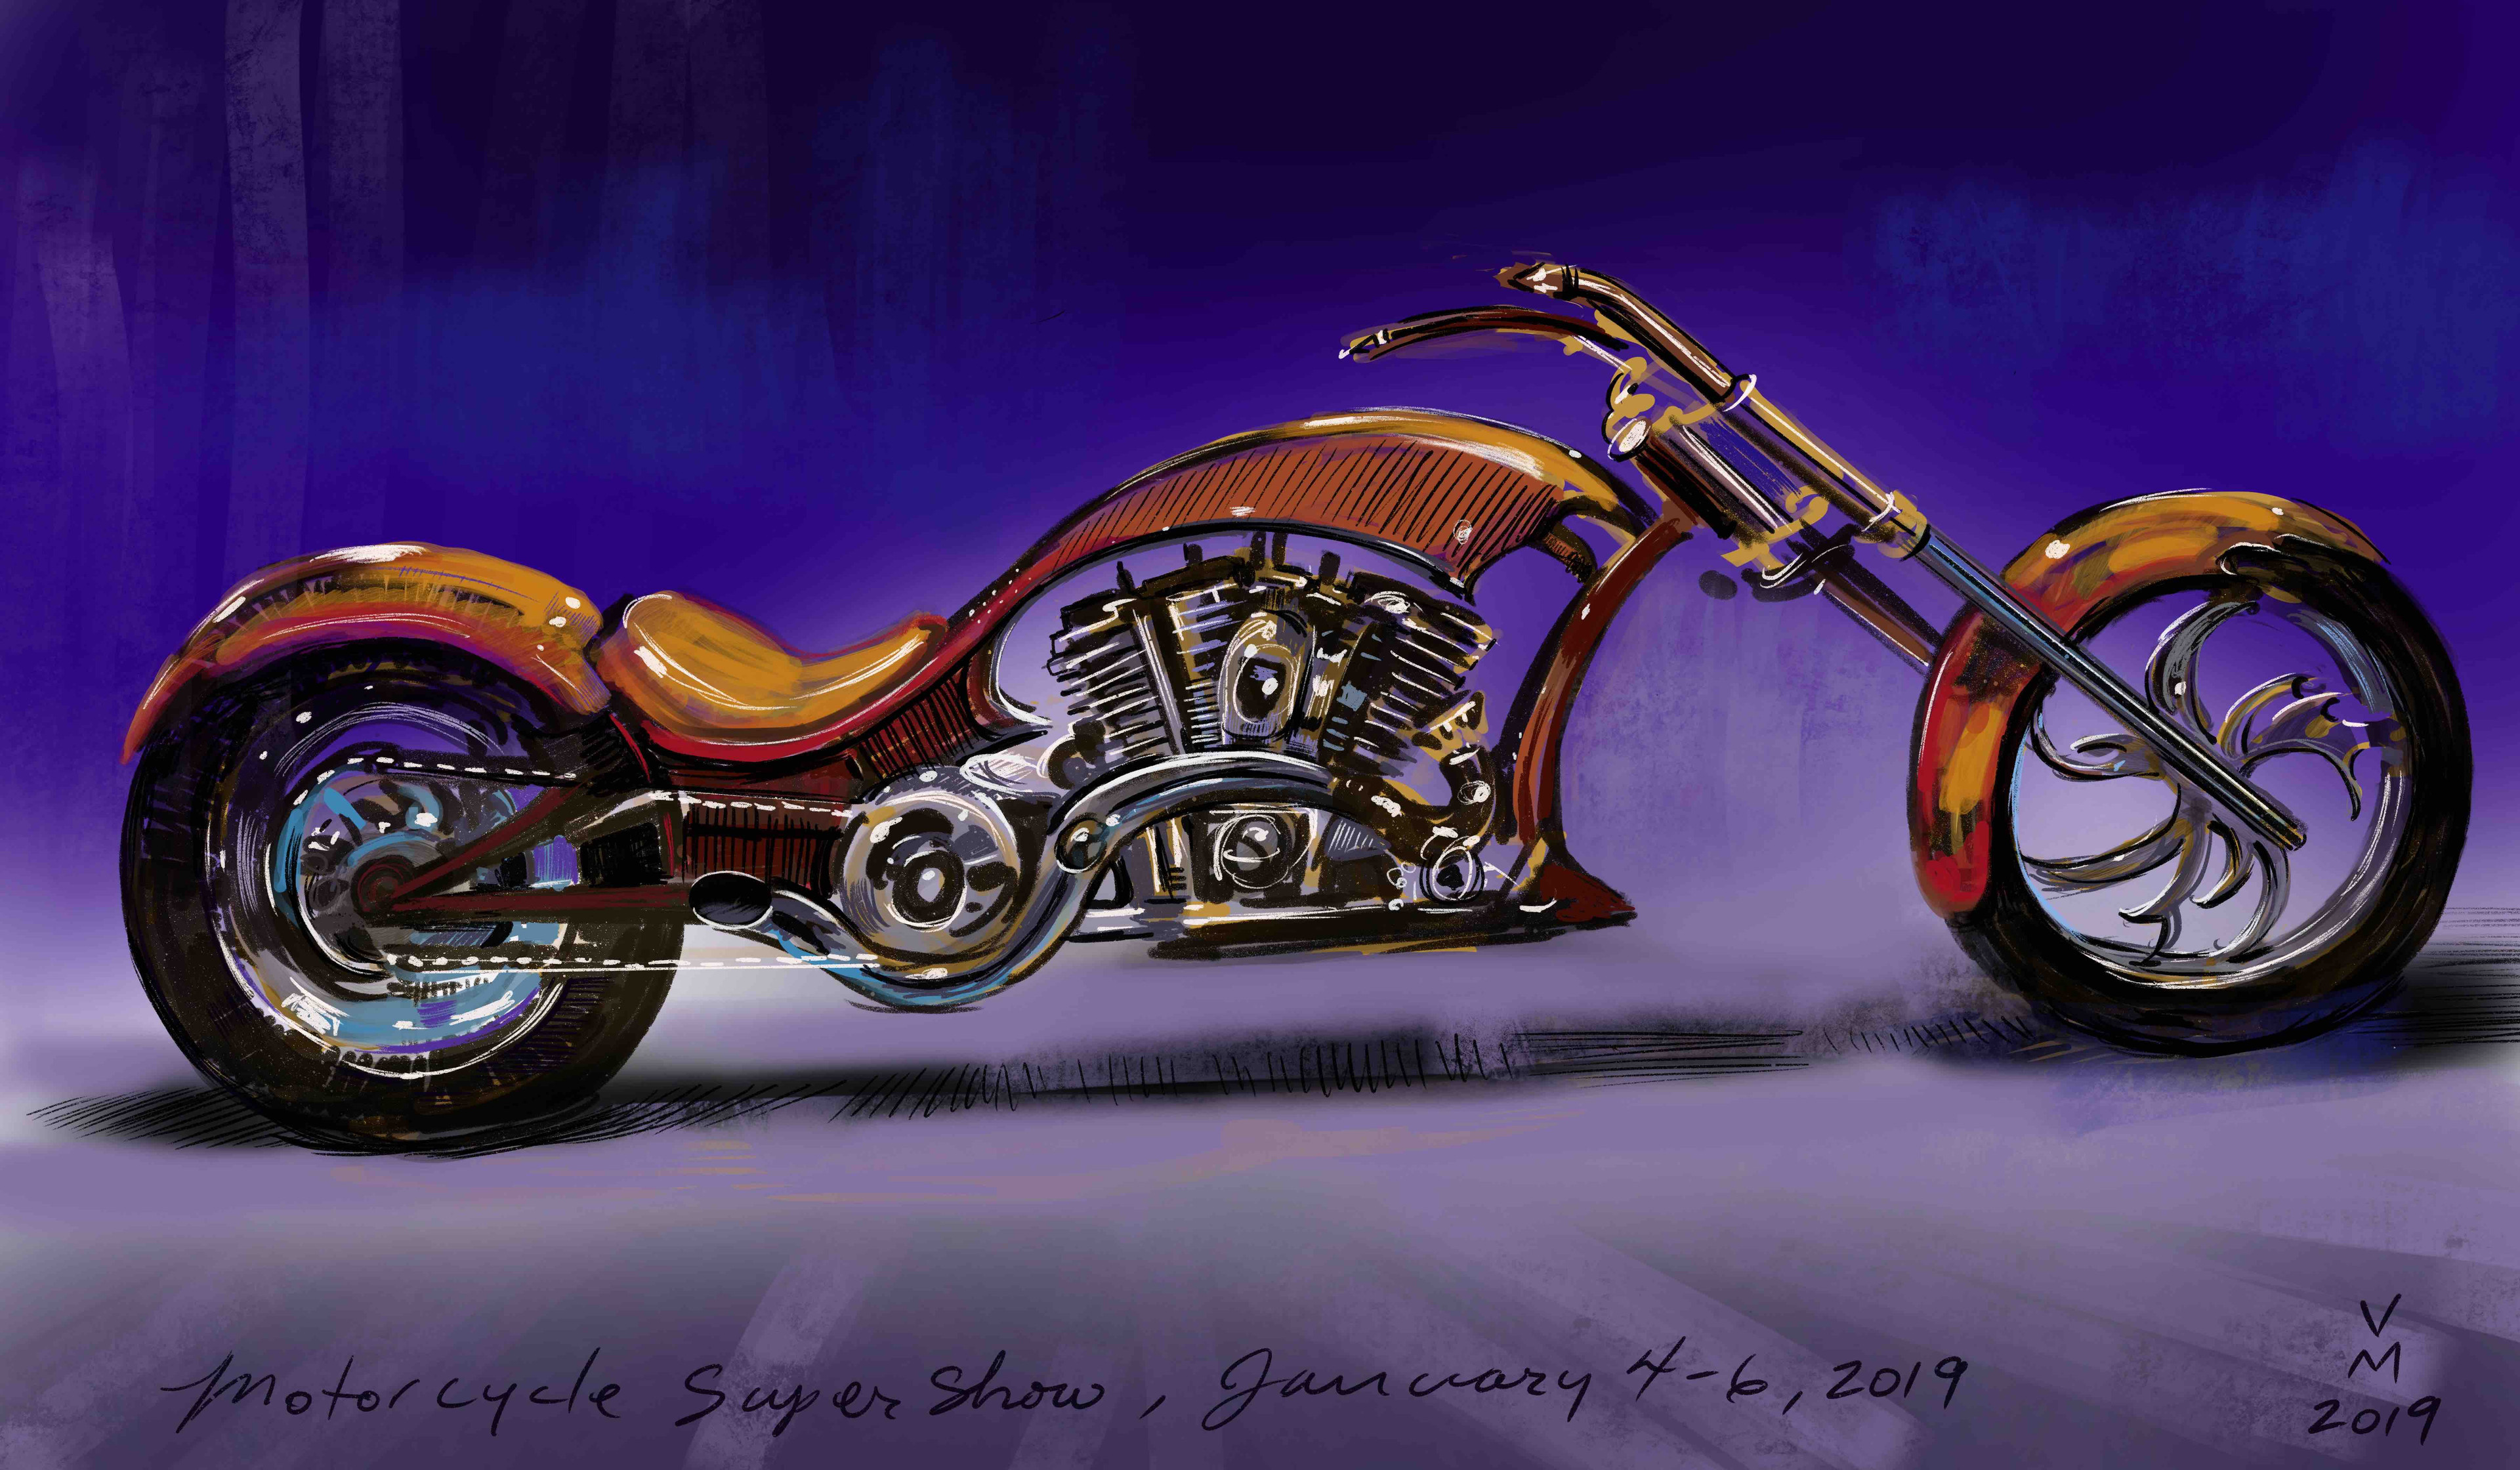 Vehicle design for Motorcycle Super Show 